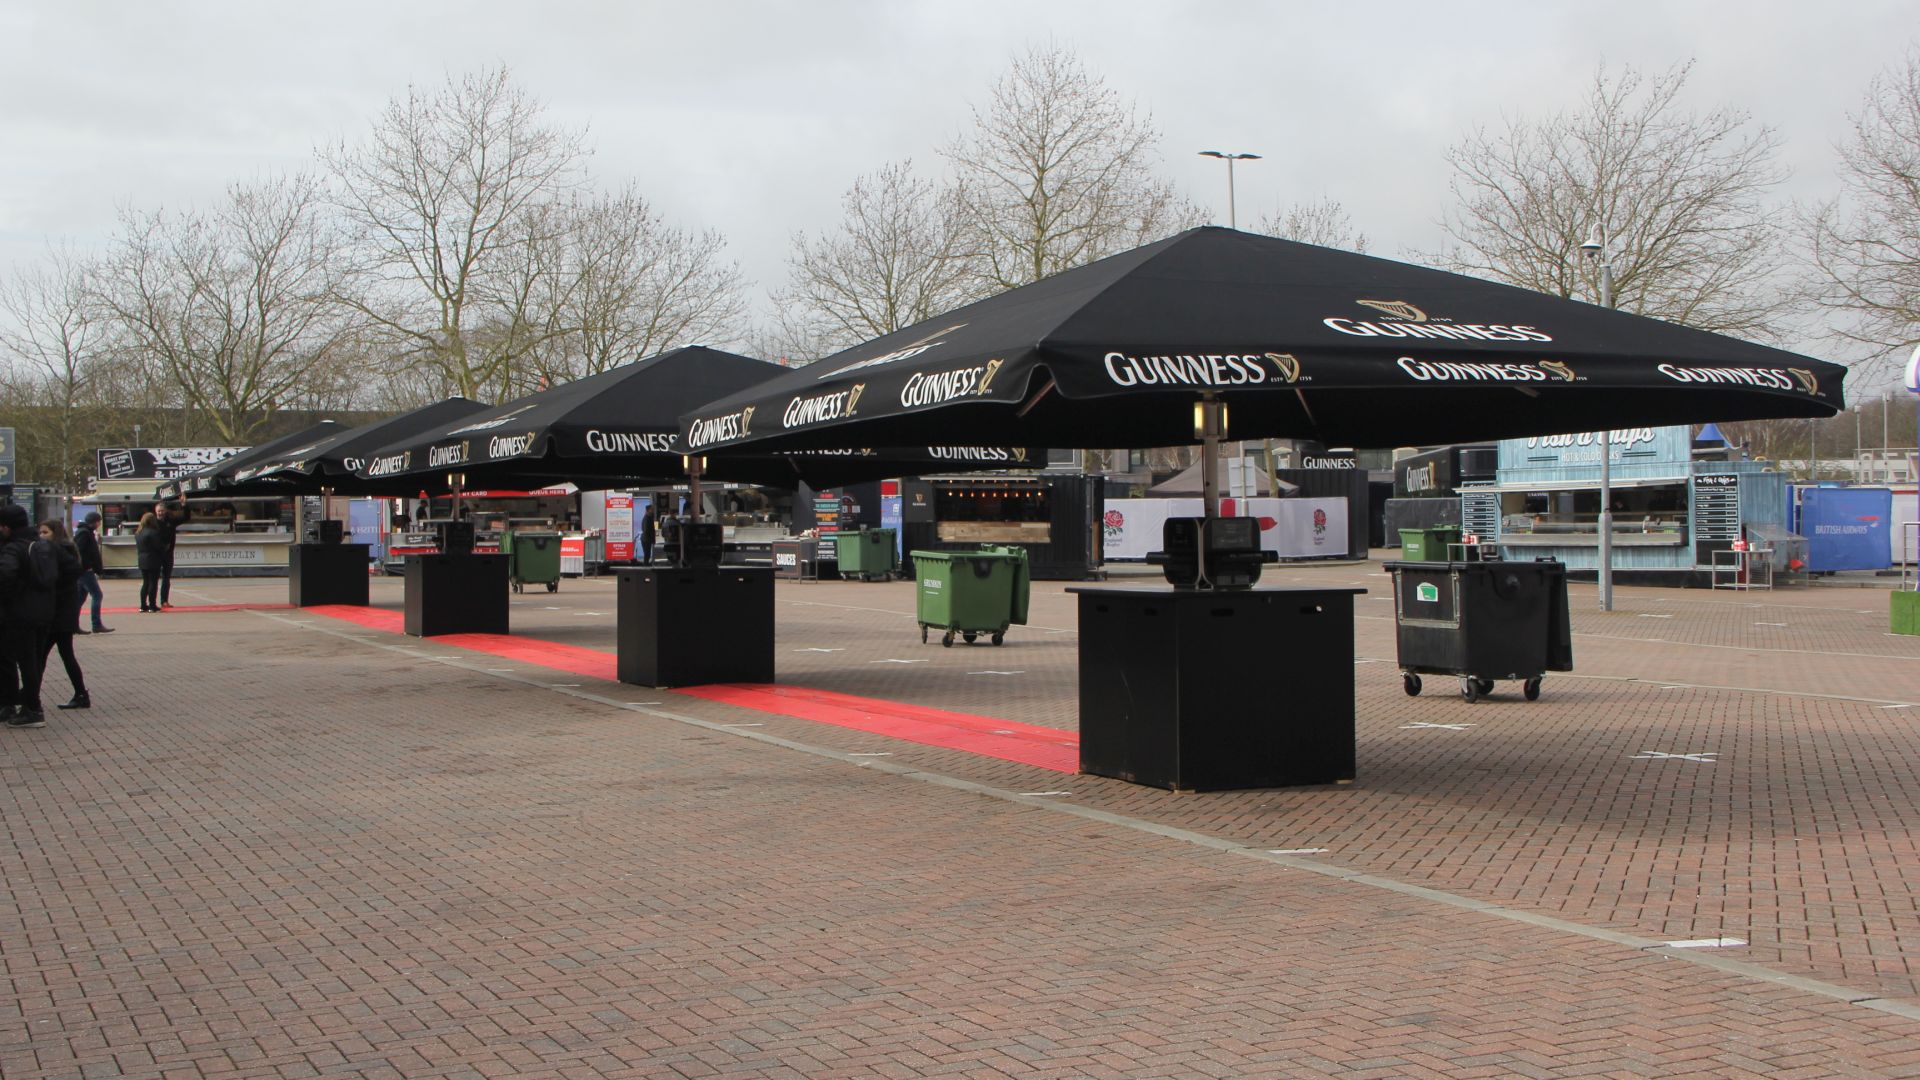 OneBigStar production for Guinness Surge Bar at Six Nations Twickenham 2020